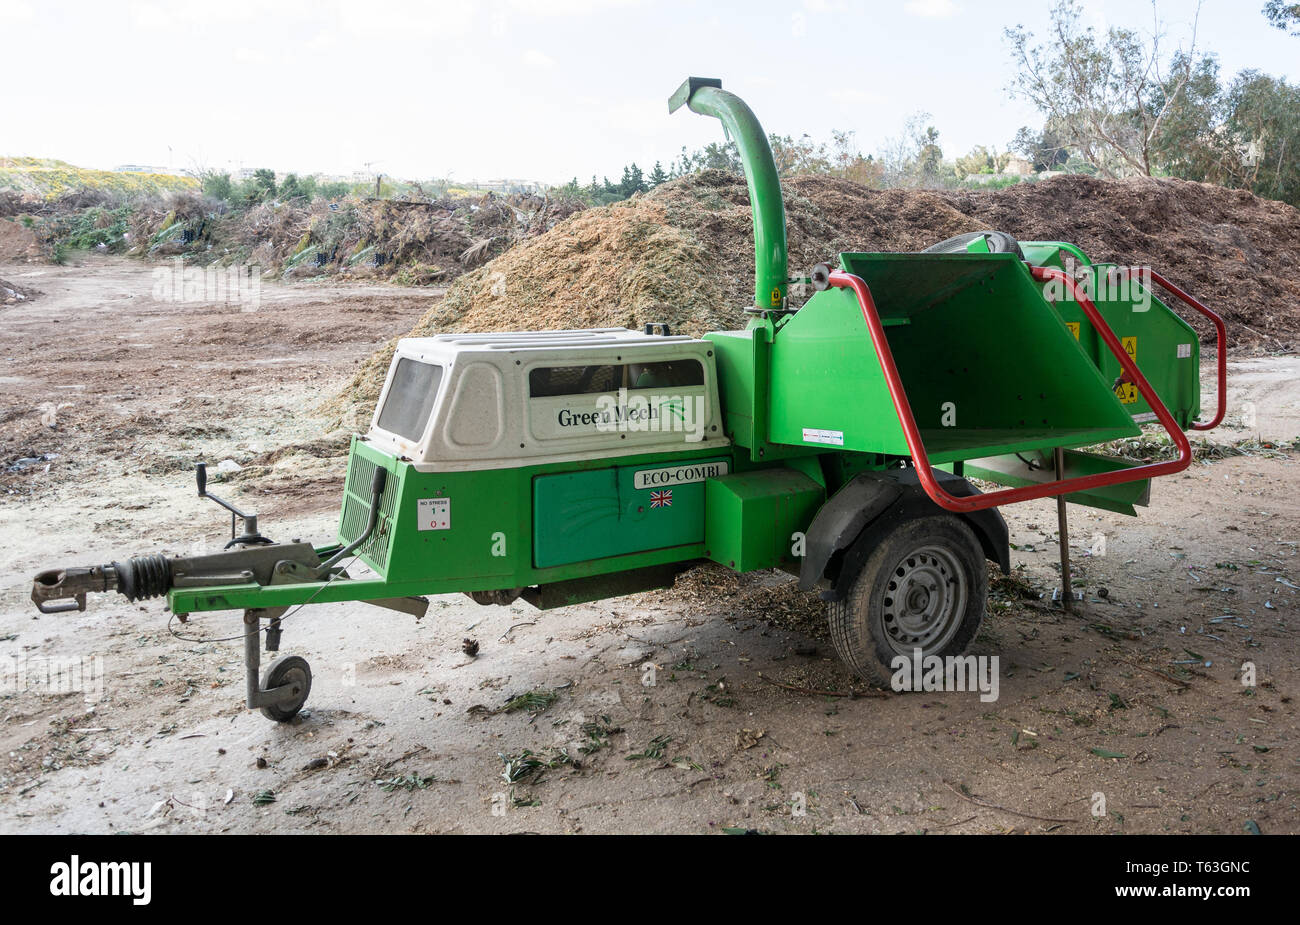 Compost Grinder - Stock Image - C027/4312 - Science Photo Library